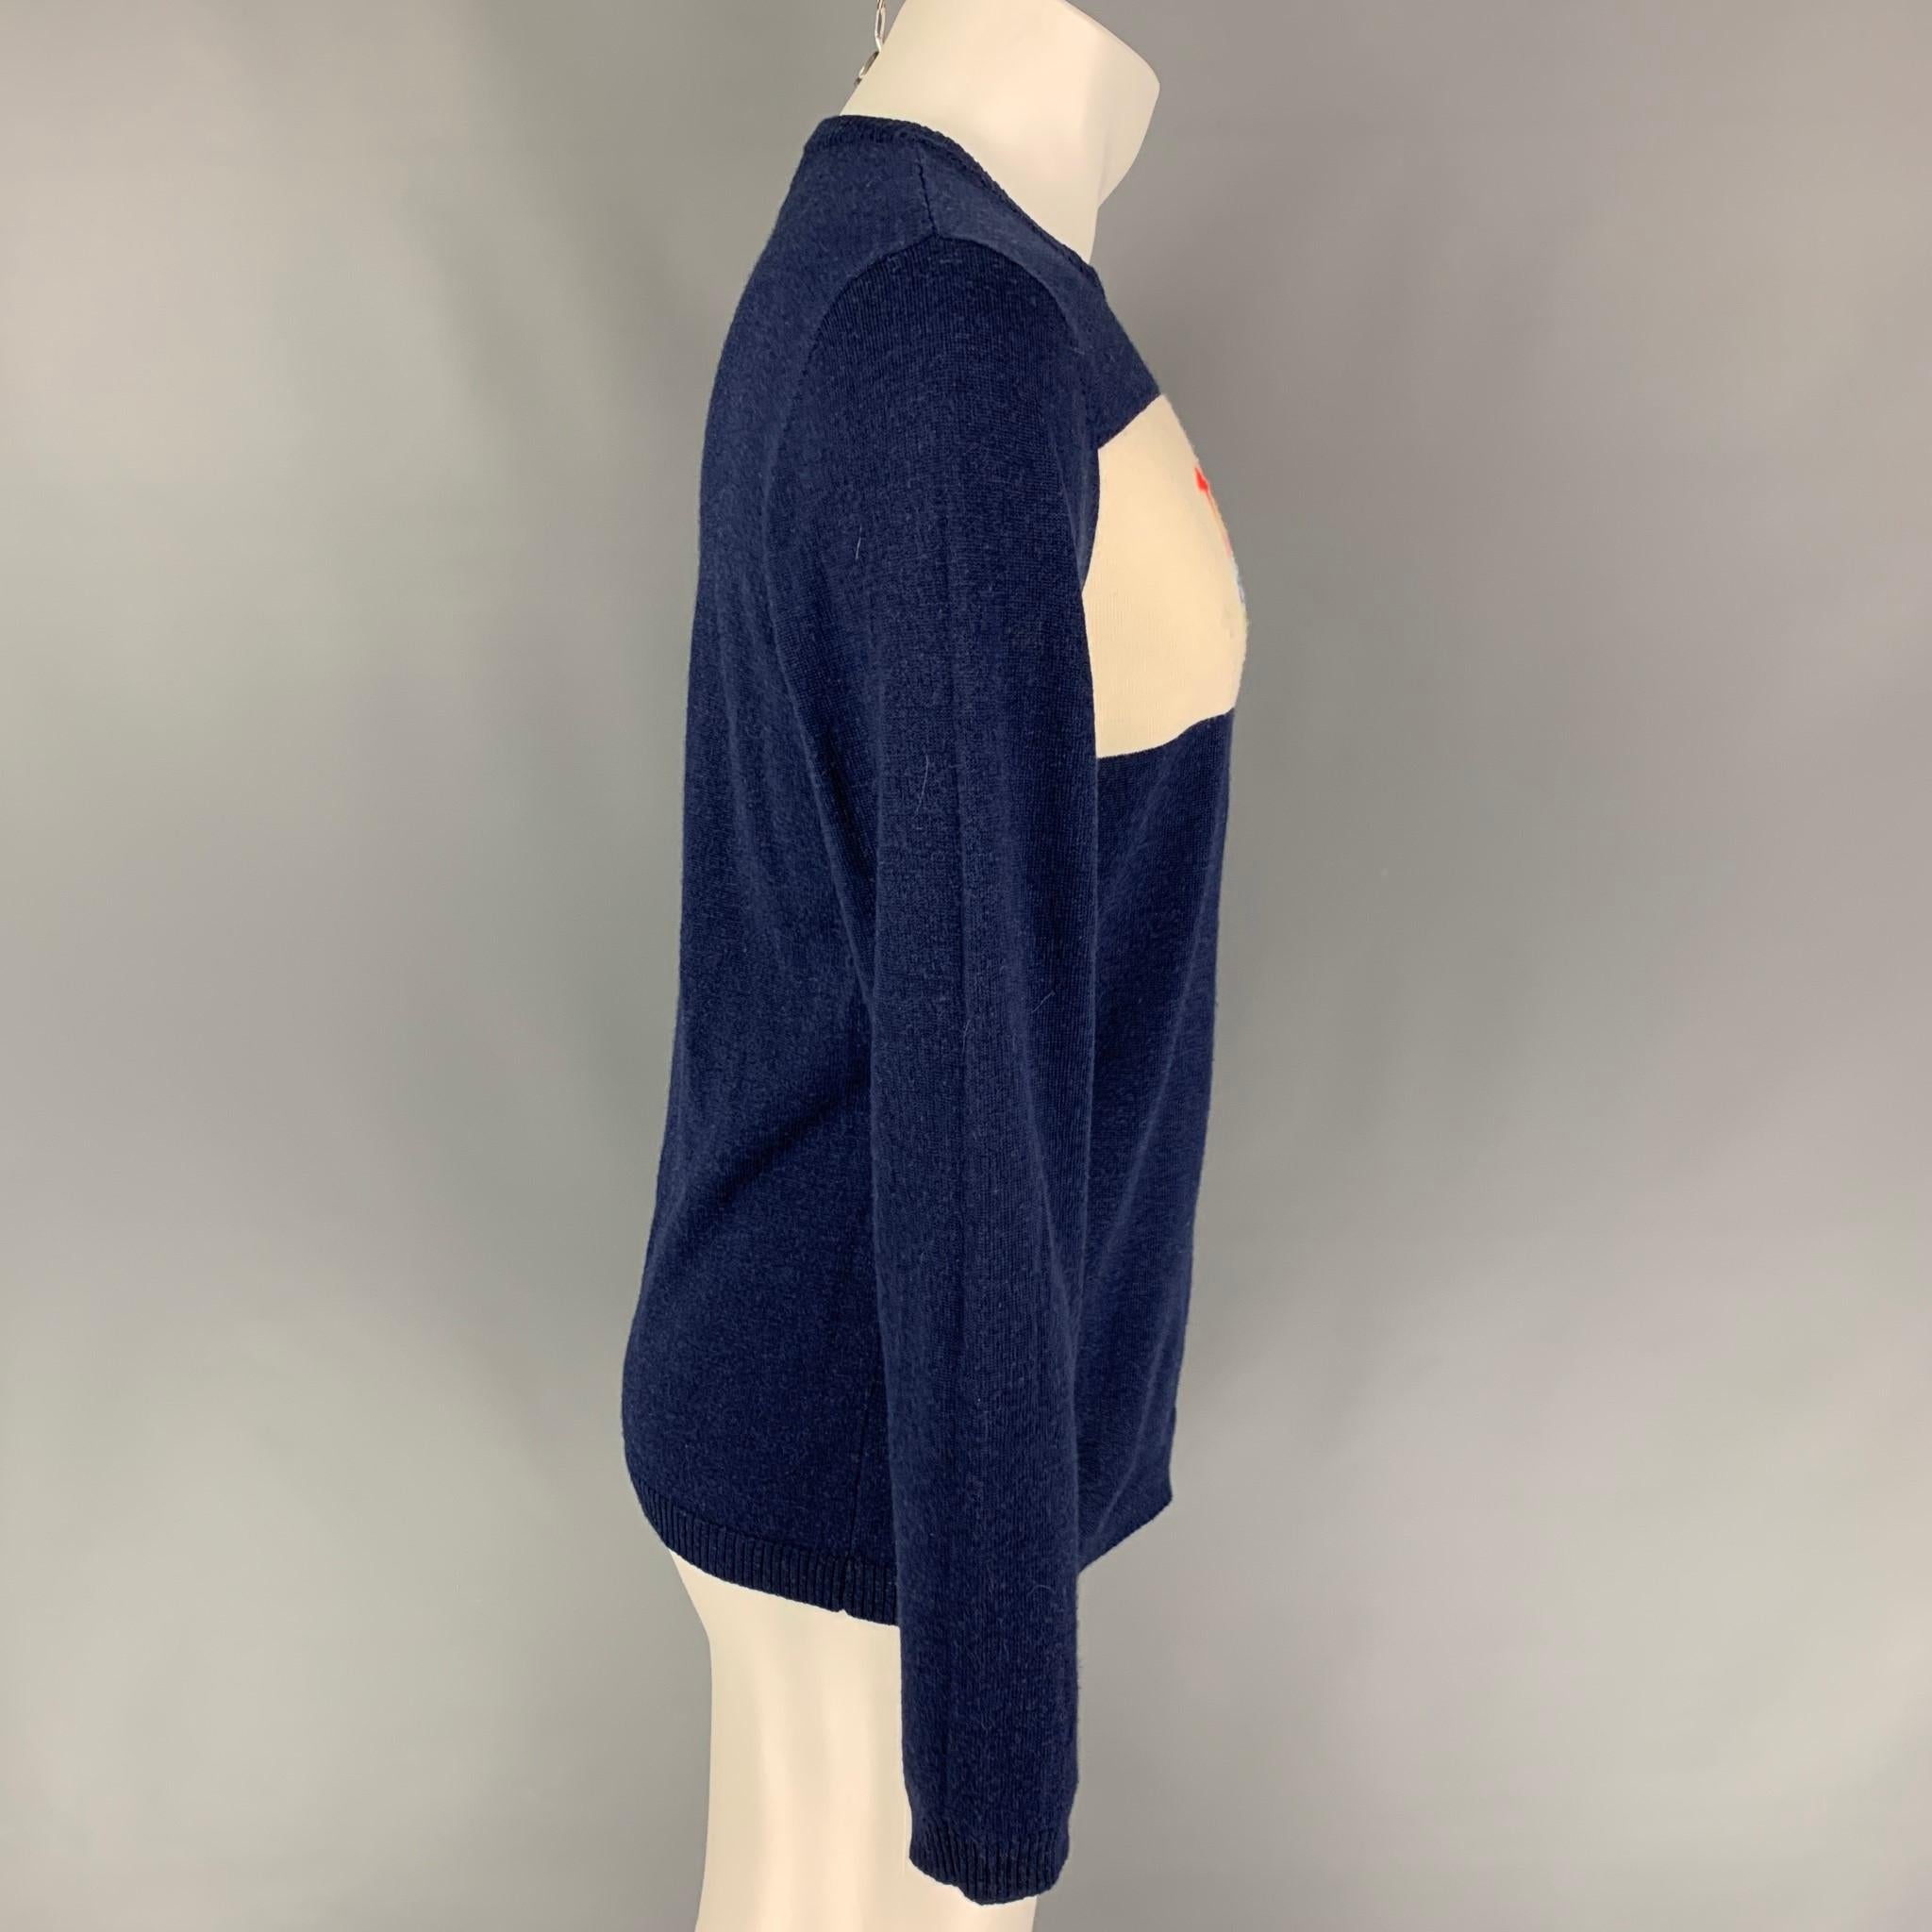 BELLA FREUD pullover comes in a navy knitted wool featuring a multi-color '1970' detail and a crew-neck.

Very Good Pre-Owned Condition.
Marked: M

Measurements:

Shoulder: 17.5 in.
Chest: 38 in.
Sleeve: 28.5 in.
Length: 26 in. 